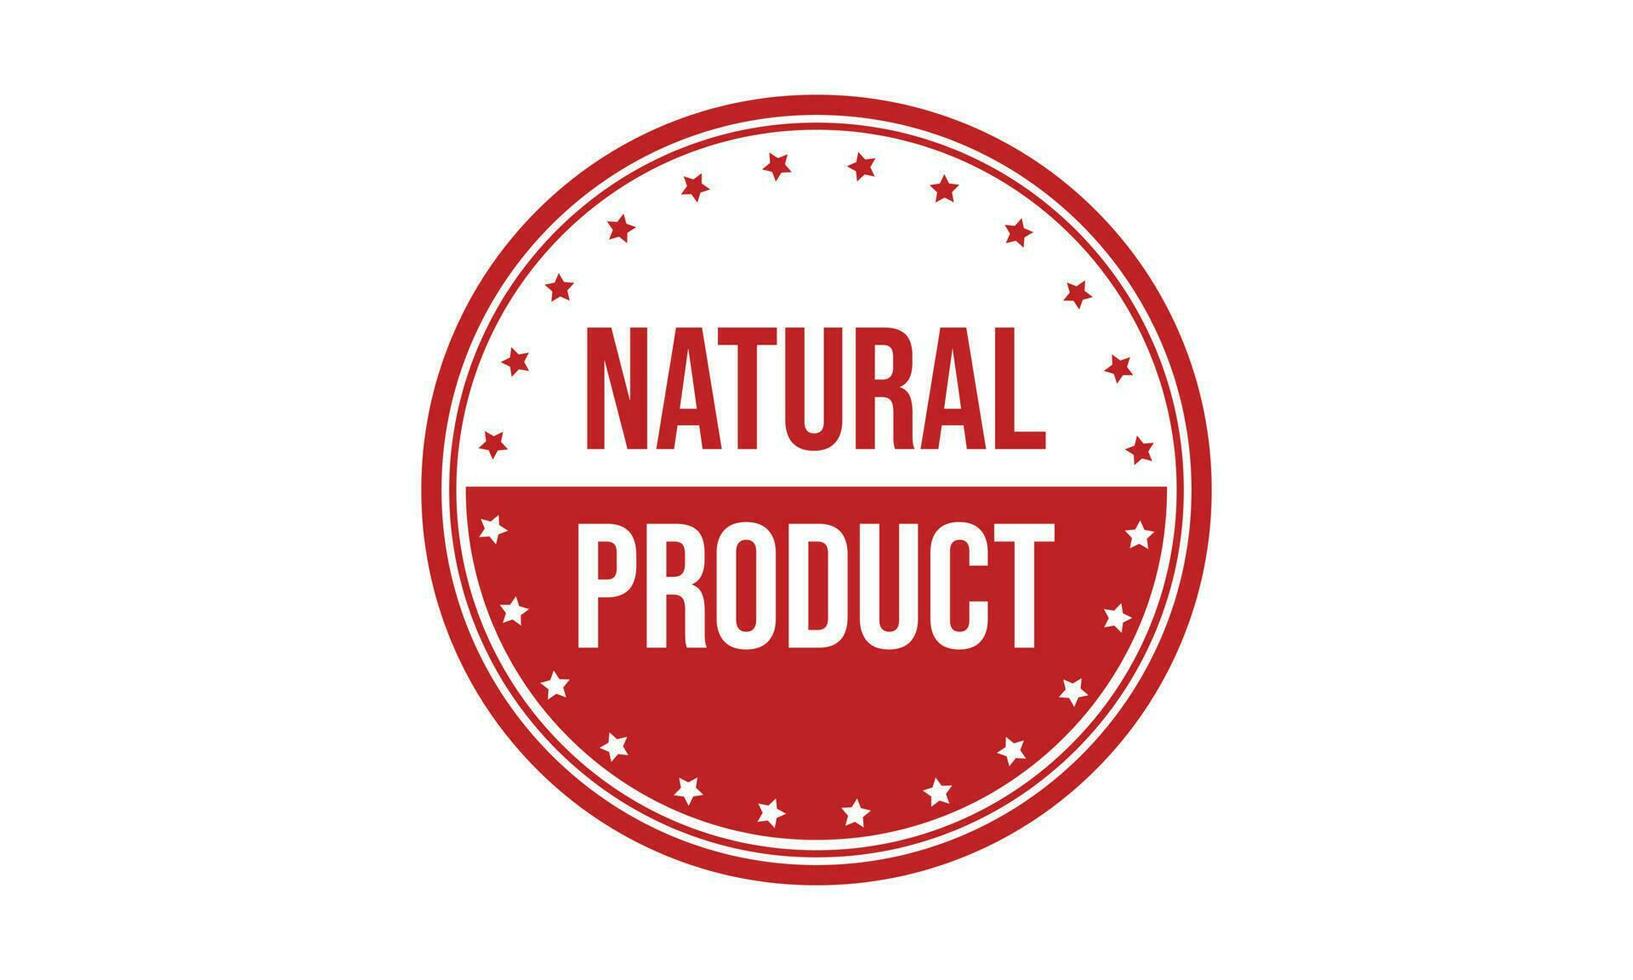 Natural Product Rubber Stamp Seal Vector